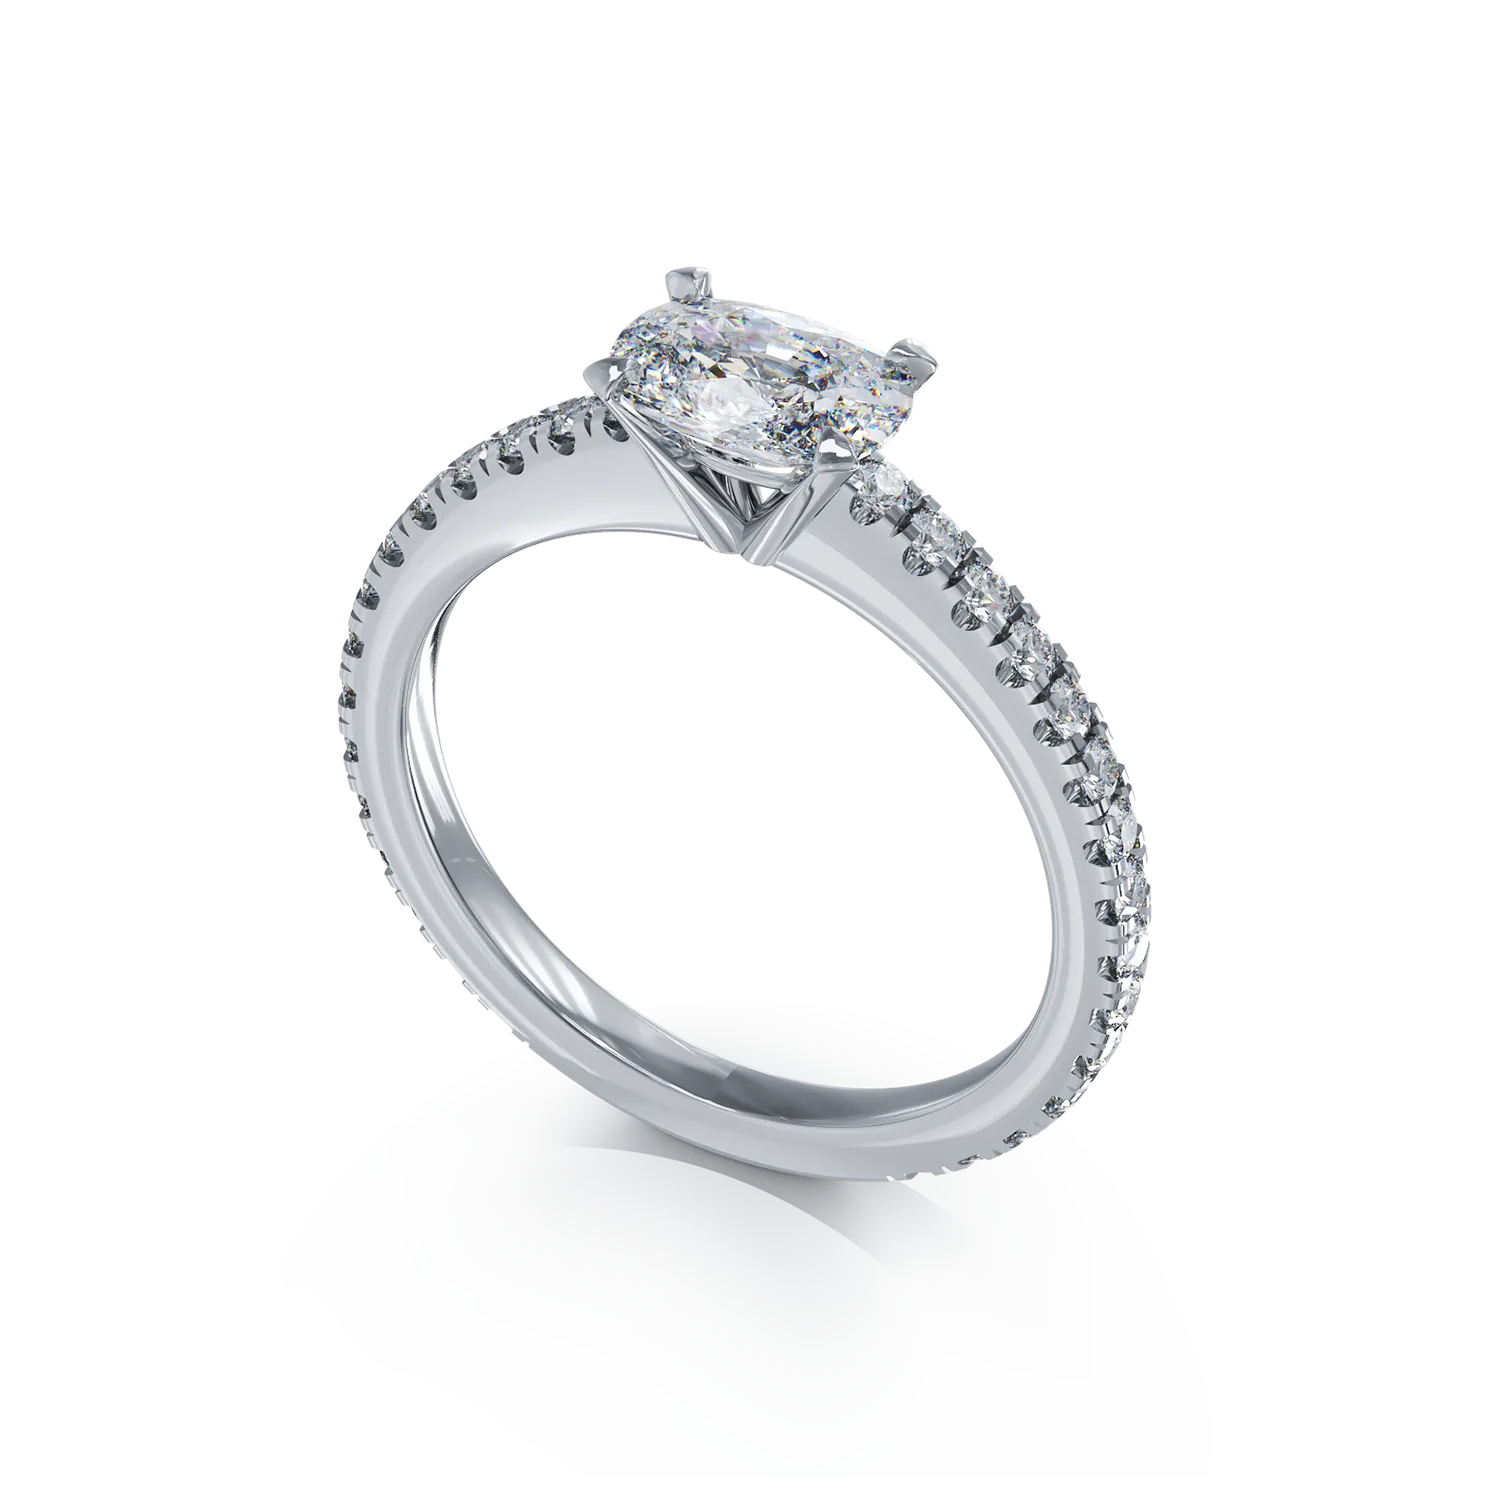 White gold engagement ring with 0.72ct diamond and 0.5ct diamonds